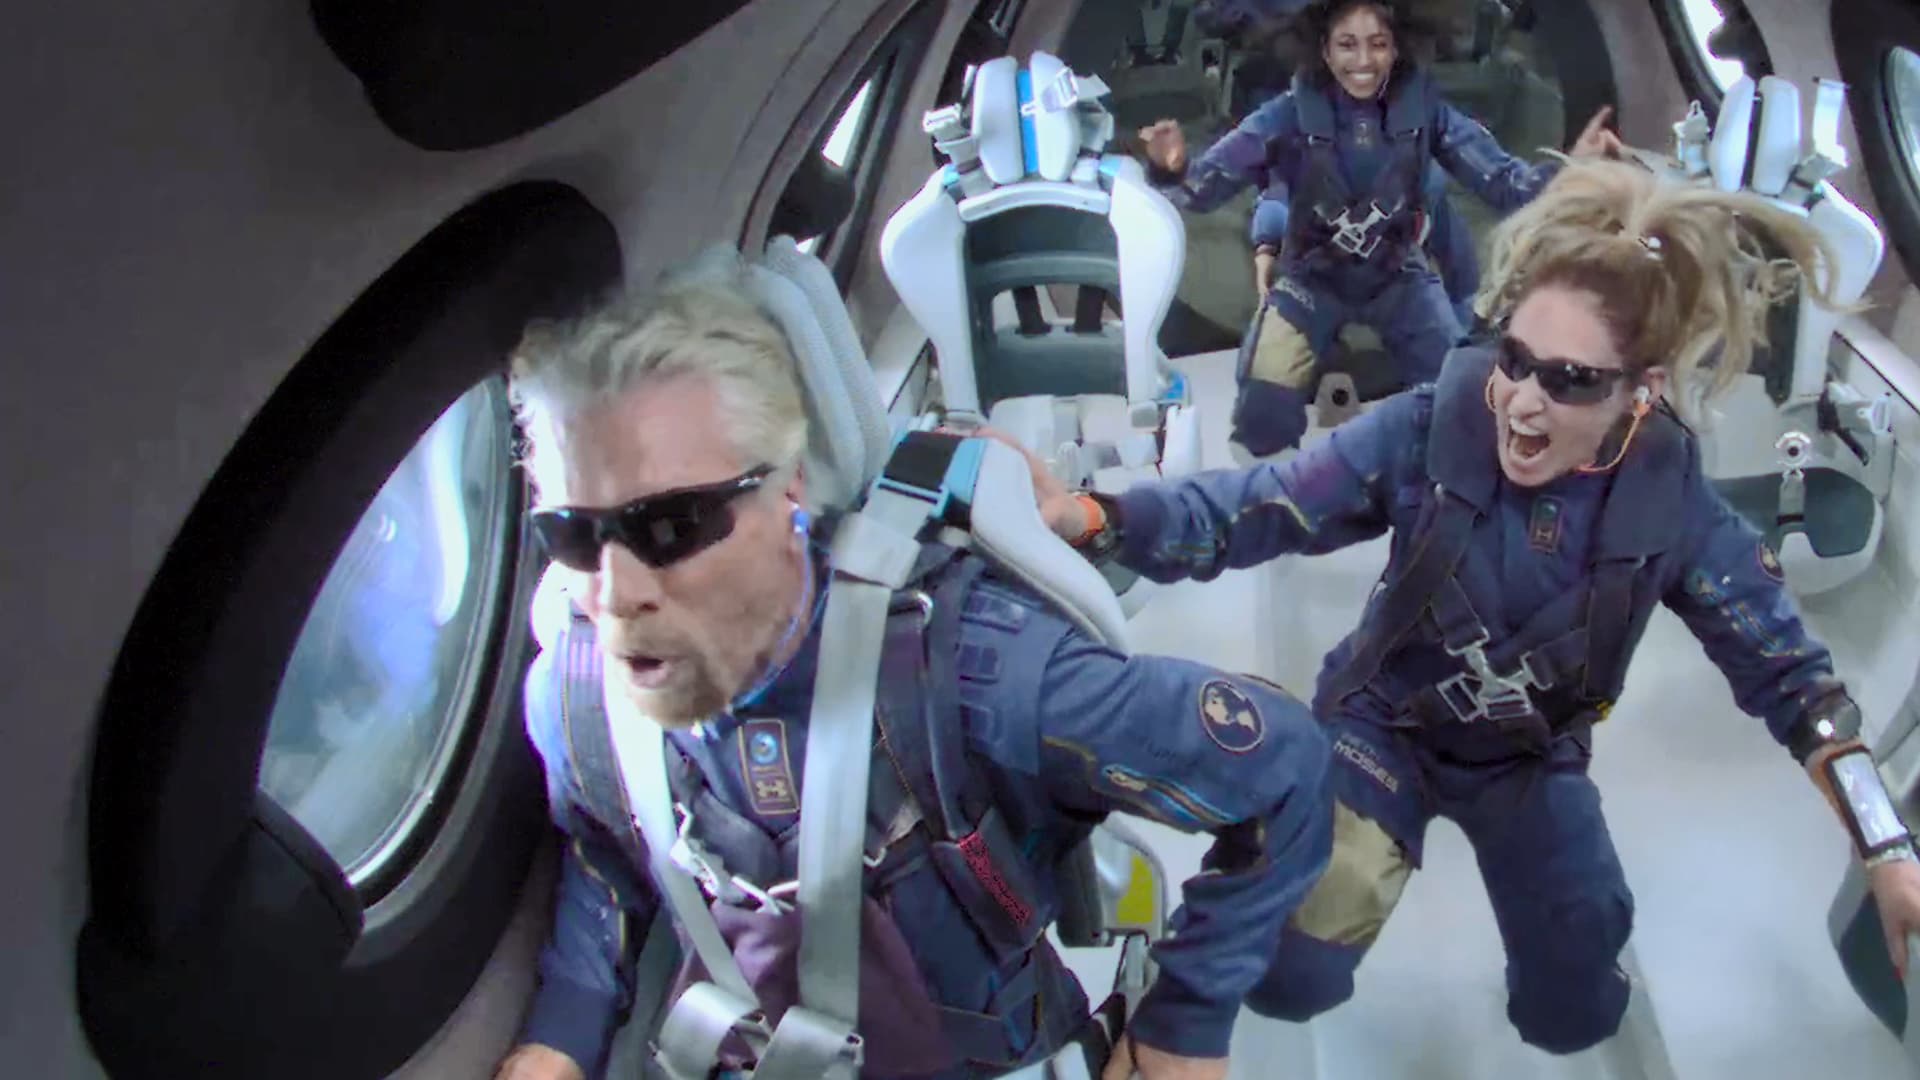 Sir Richard Branson, left, in space alongside mission specialists Sirisha Bandla and Beth Moses on July 11, 2021.